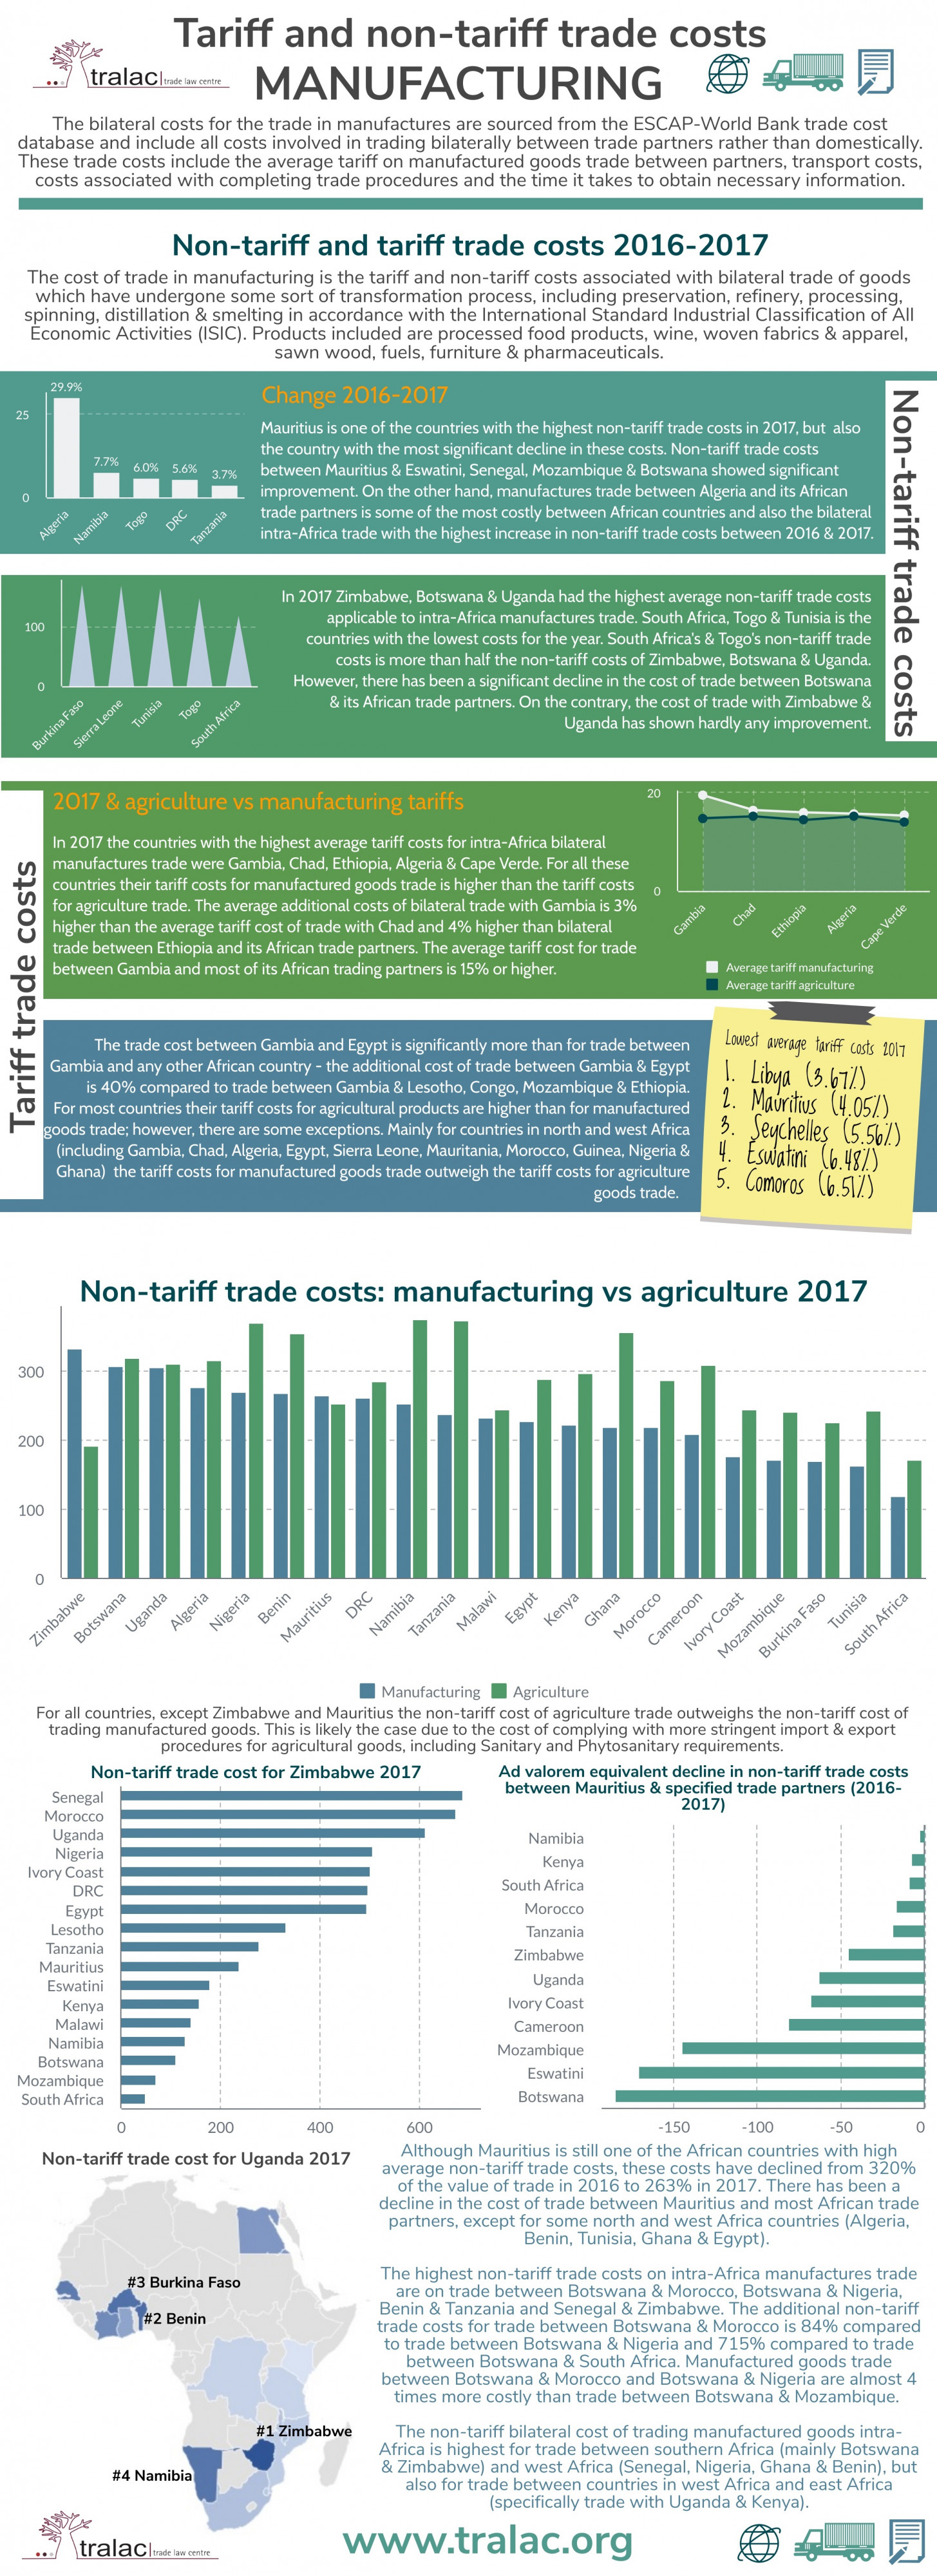 Tariff and non-tariff trade costs of intra-African manufacturing trade